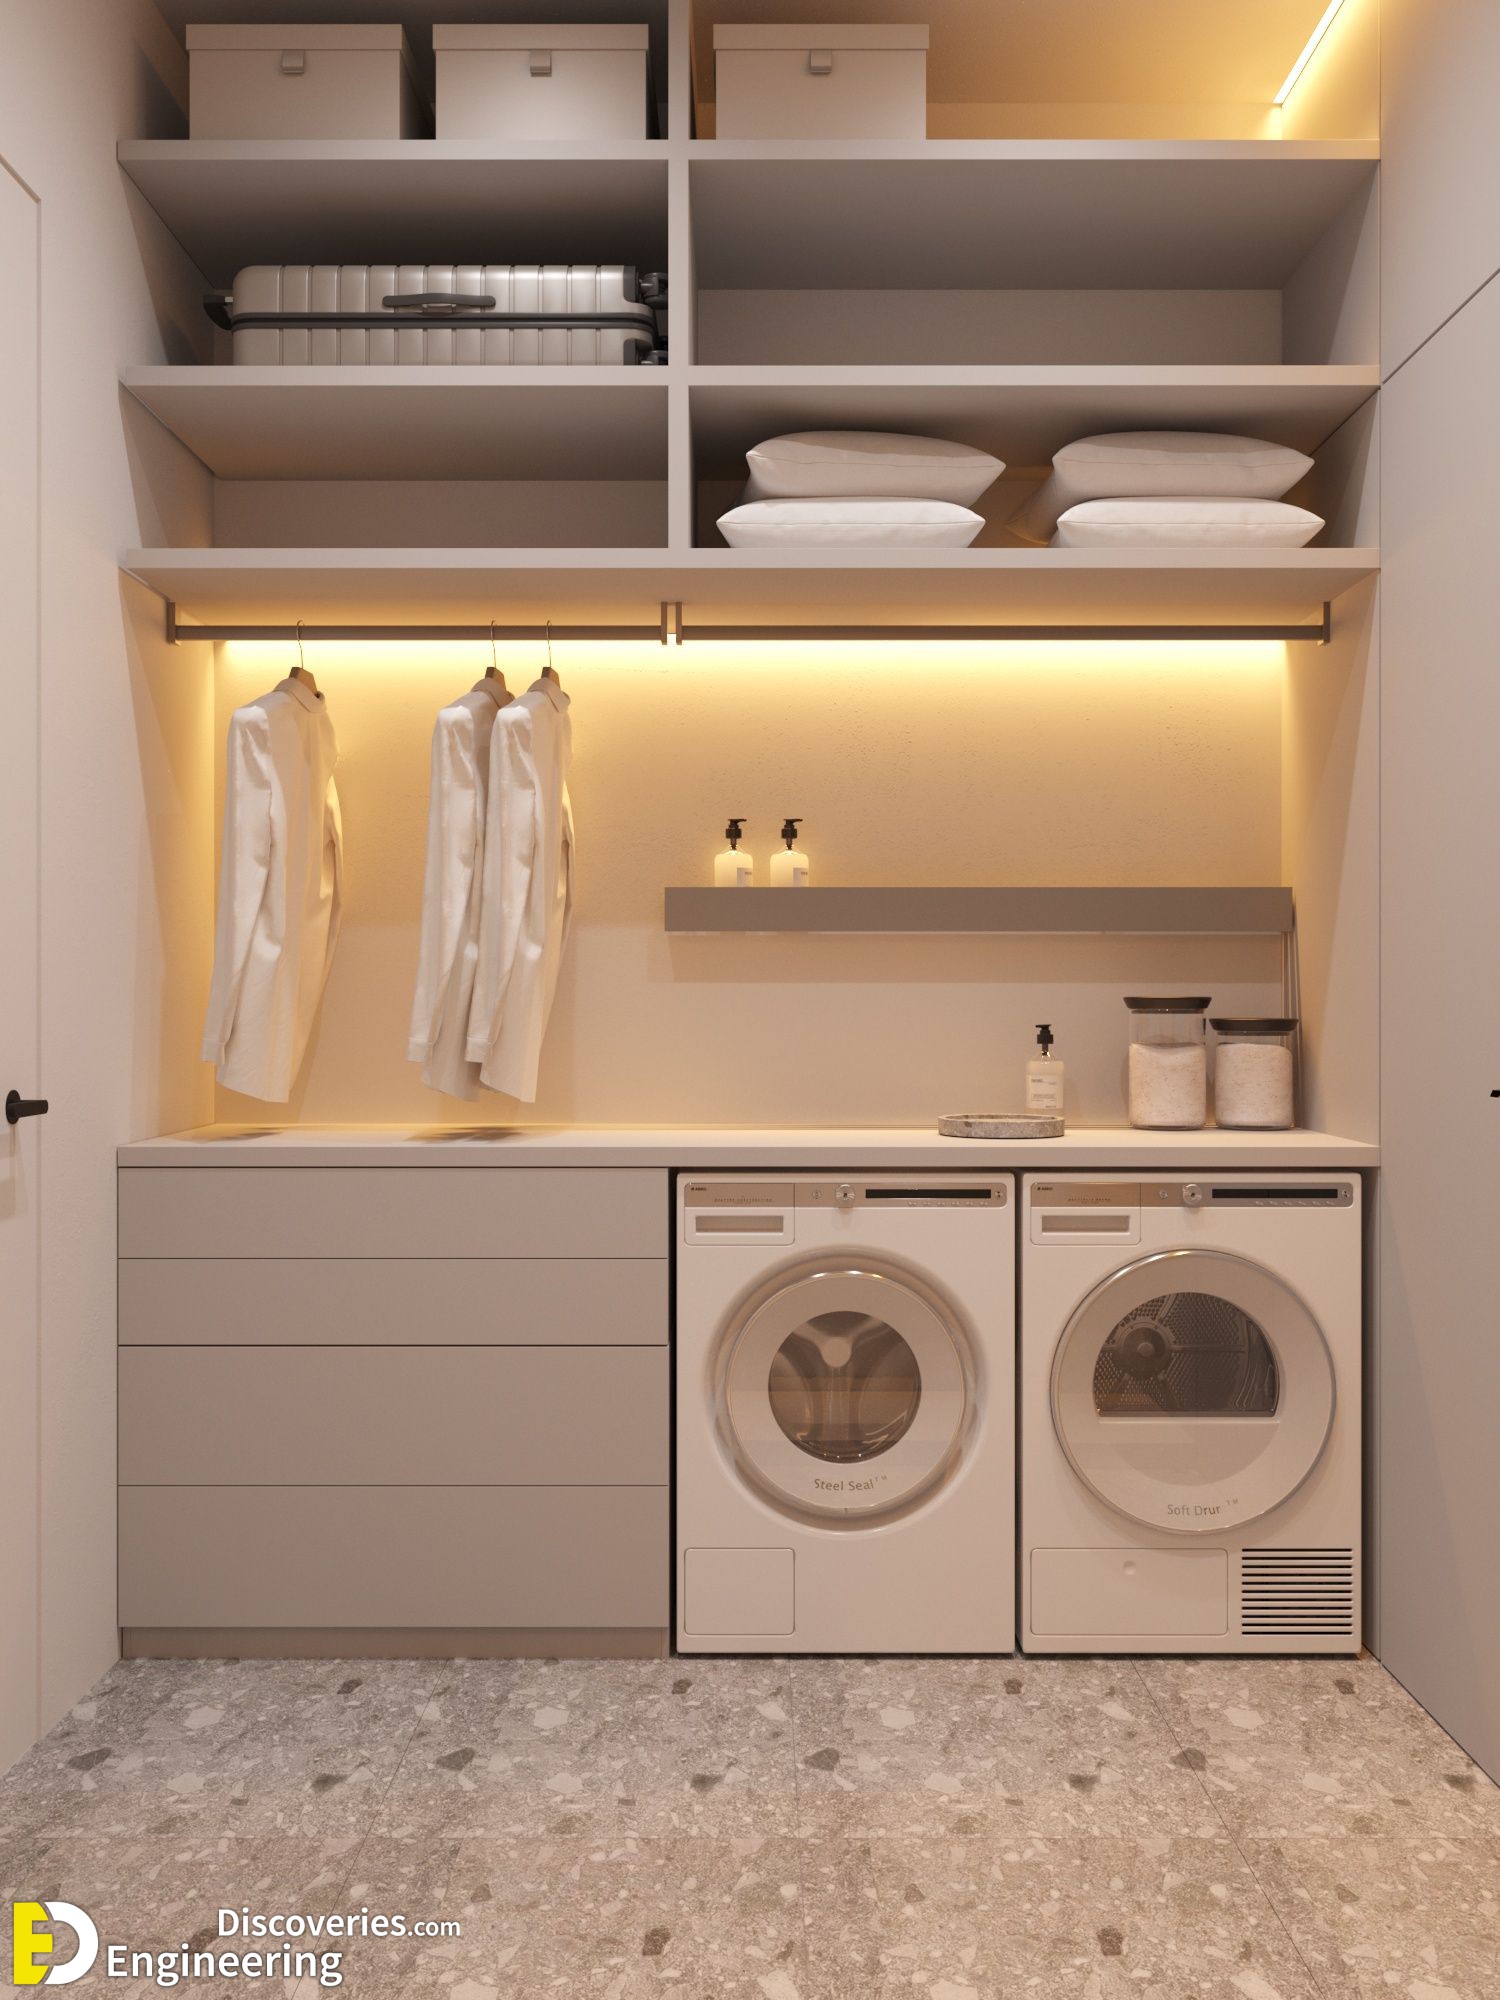 https://engineeringdiscoveries.com/3-engineering-discoveries-36-small-laundry-room-ideas-that-maximize-space-and-style/